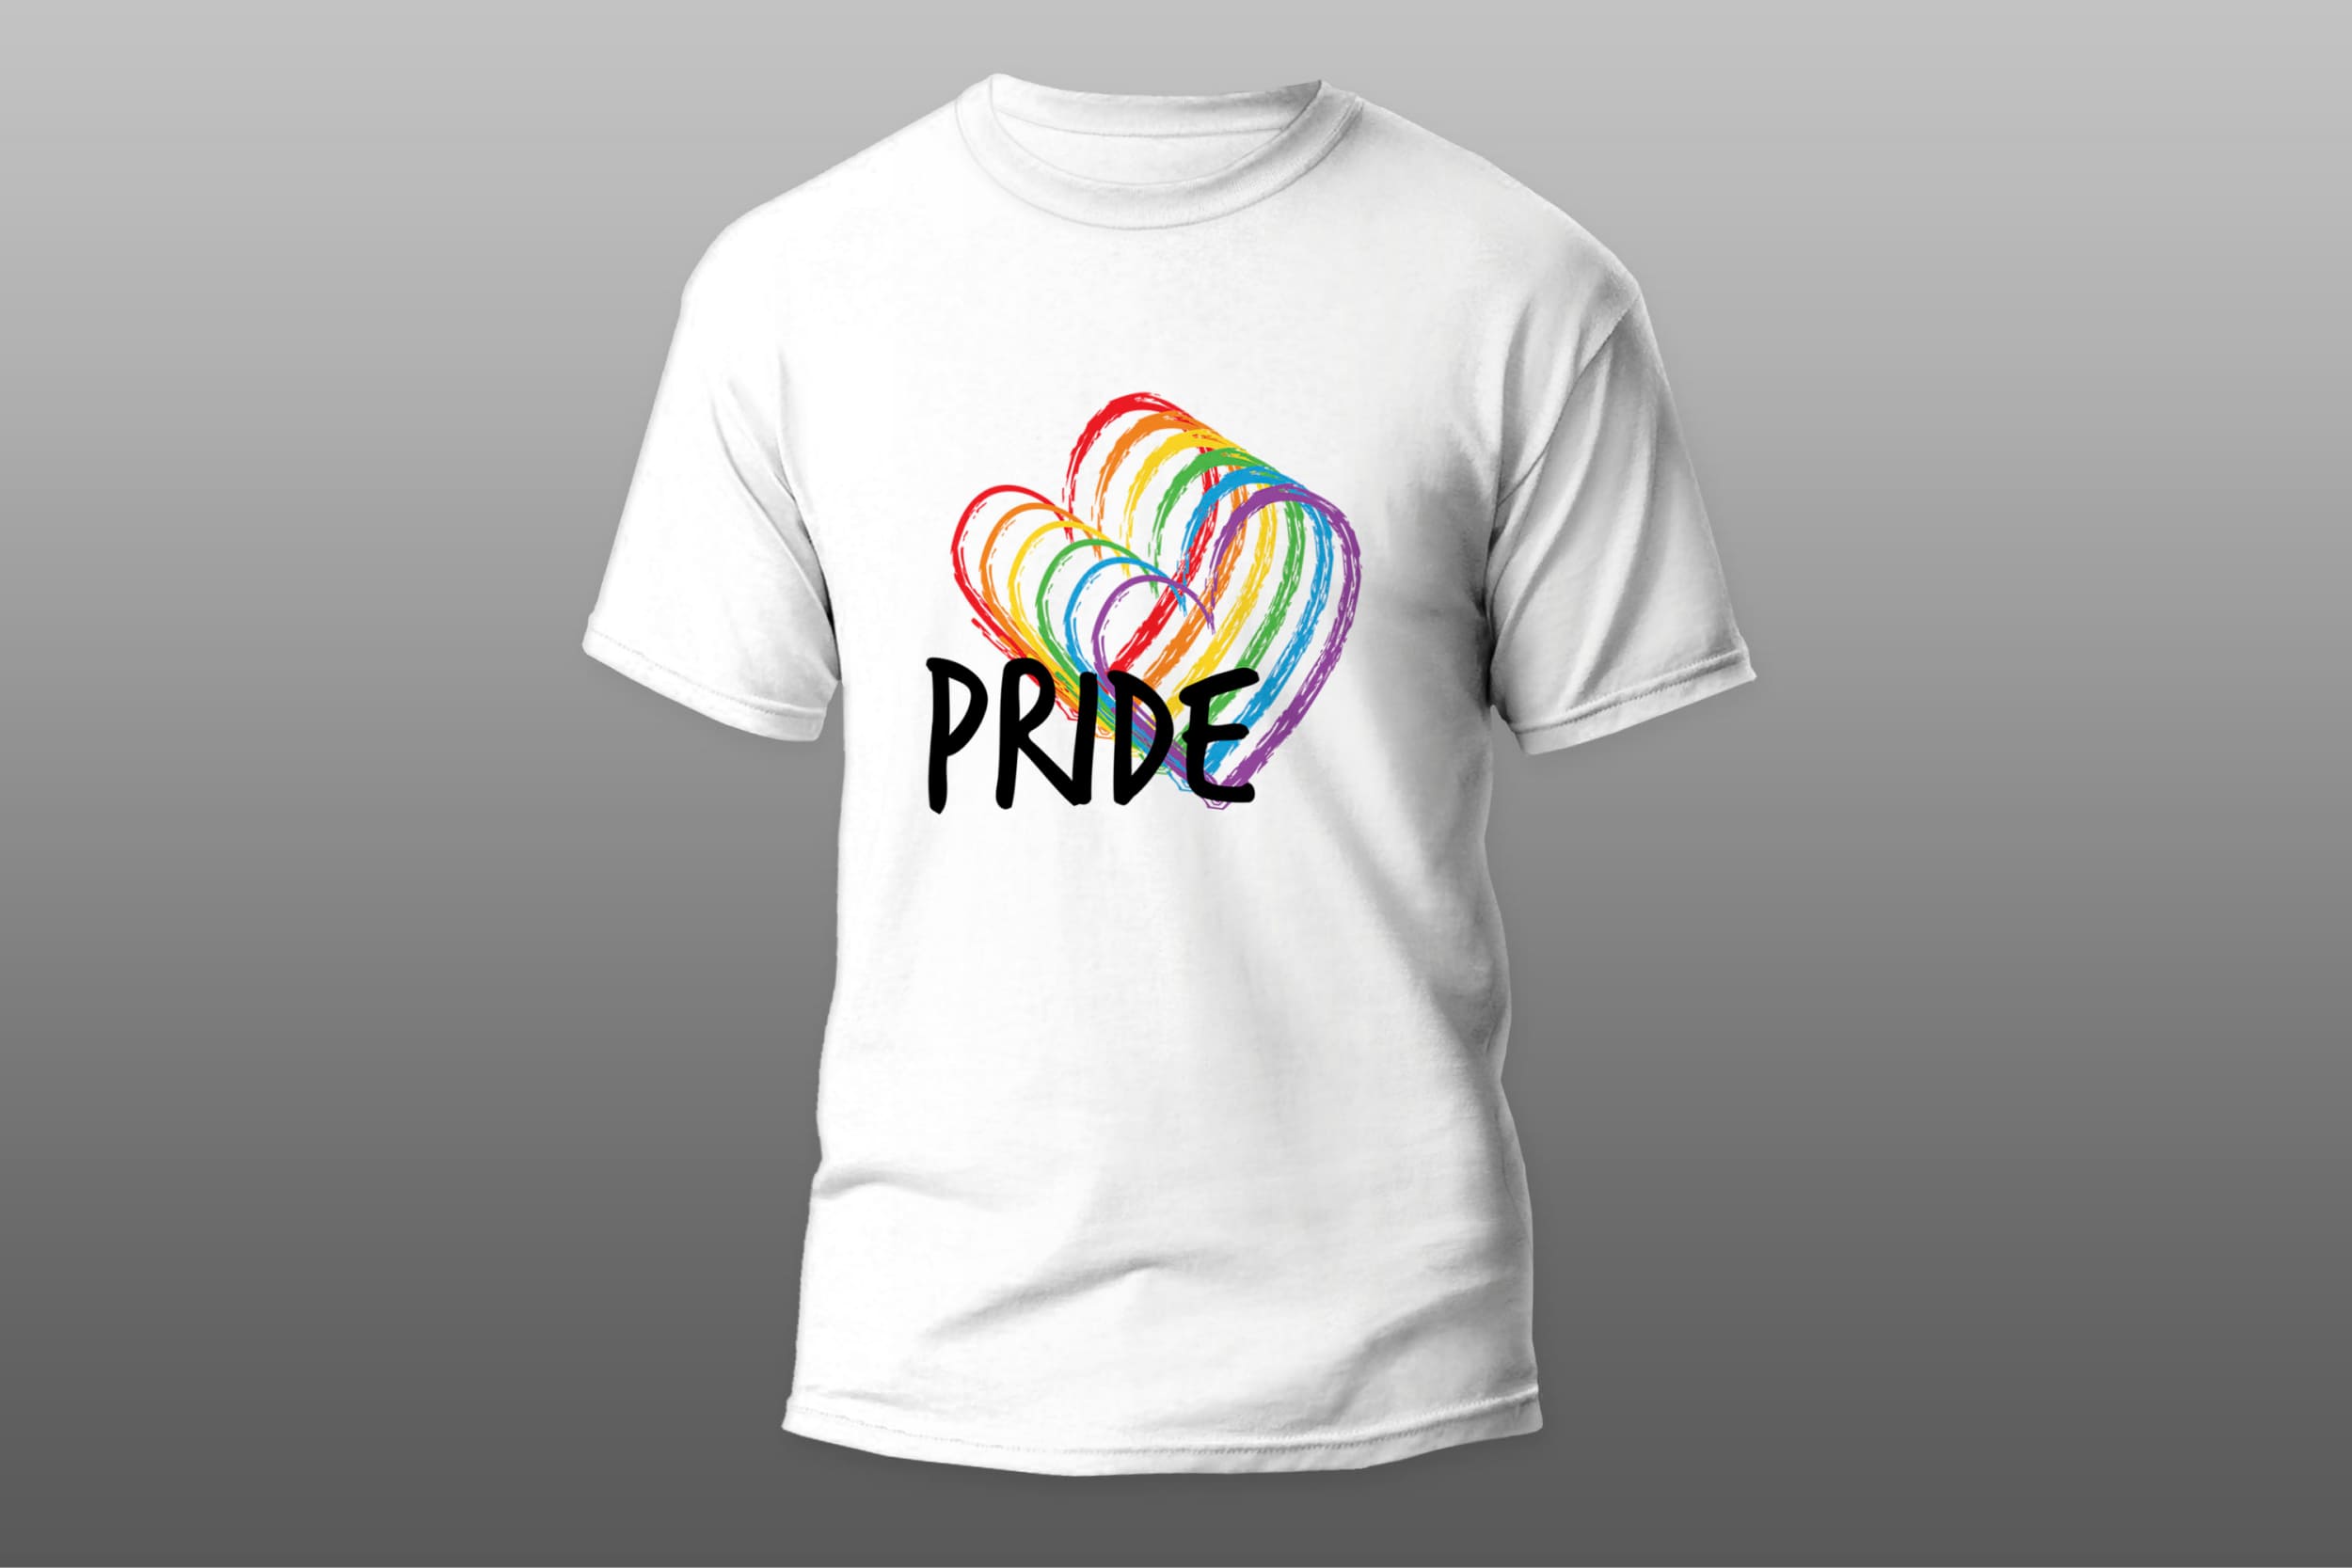 White T-shirt with black "Pride" lettering and hearts in the colors of the LGBT flag on a gray background.